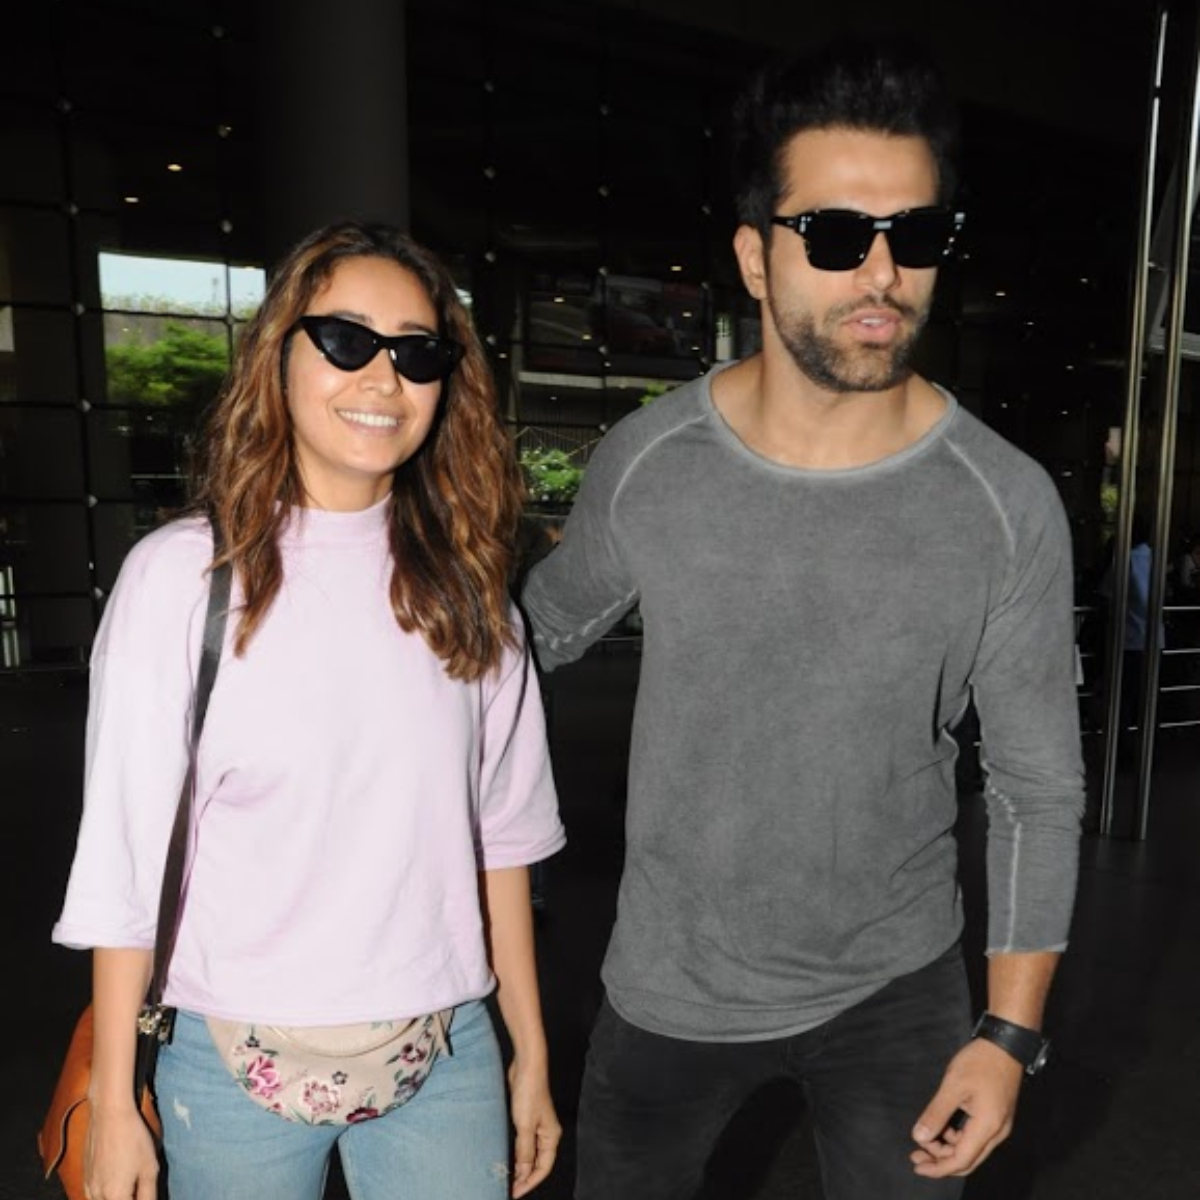 EXCLUSIVE VIDEO: Asha Negi opens up on Rithvik Dhanjani: ‘We both want the best for each other’